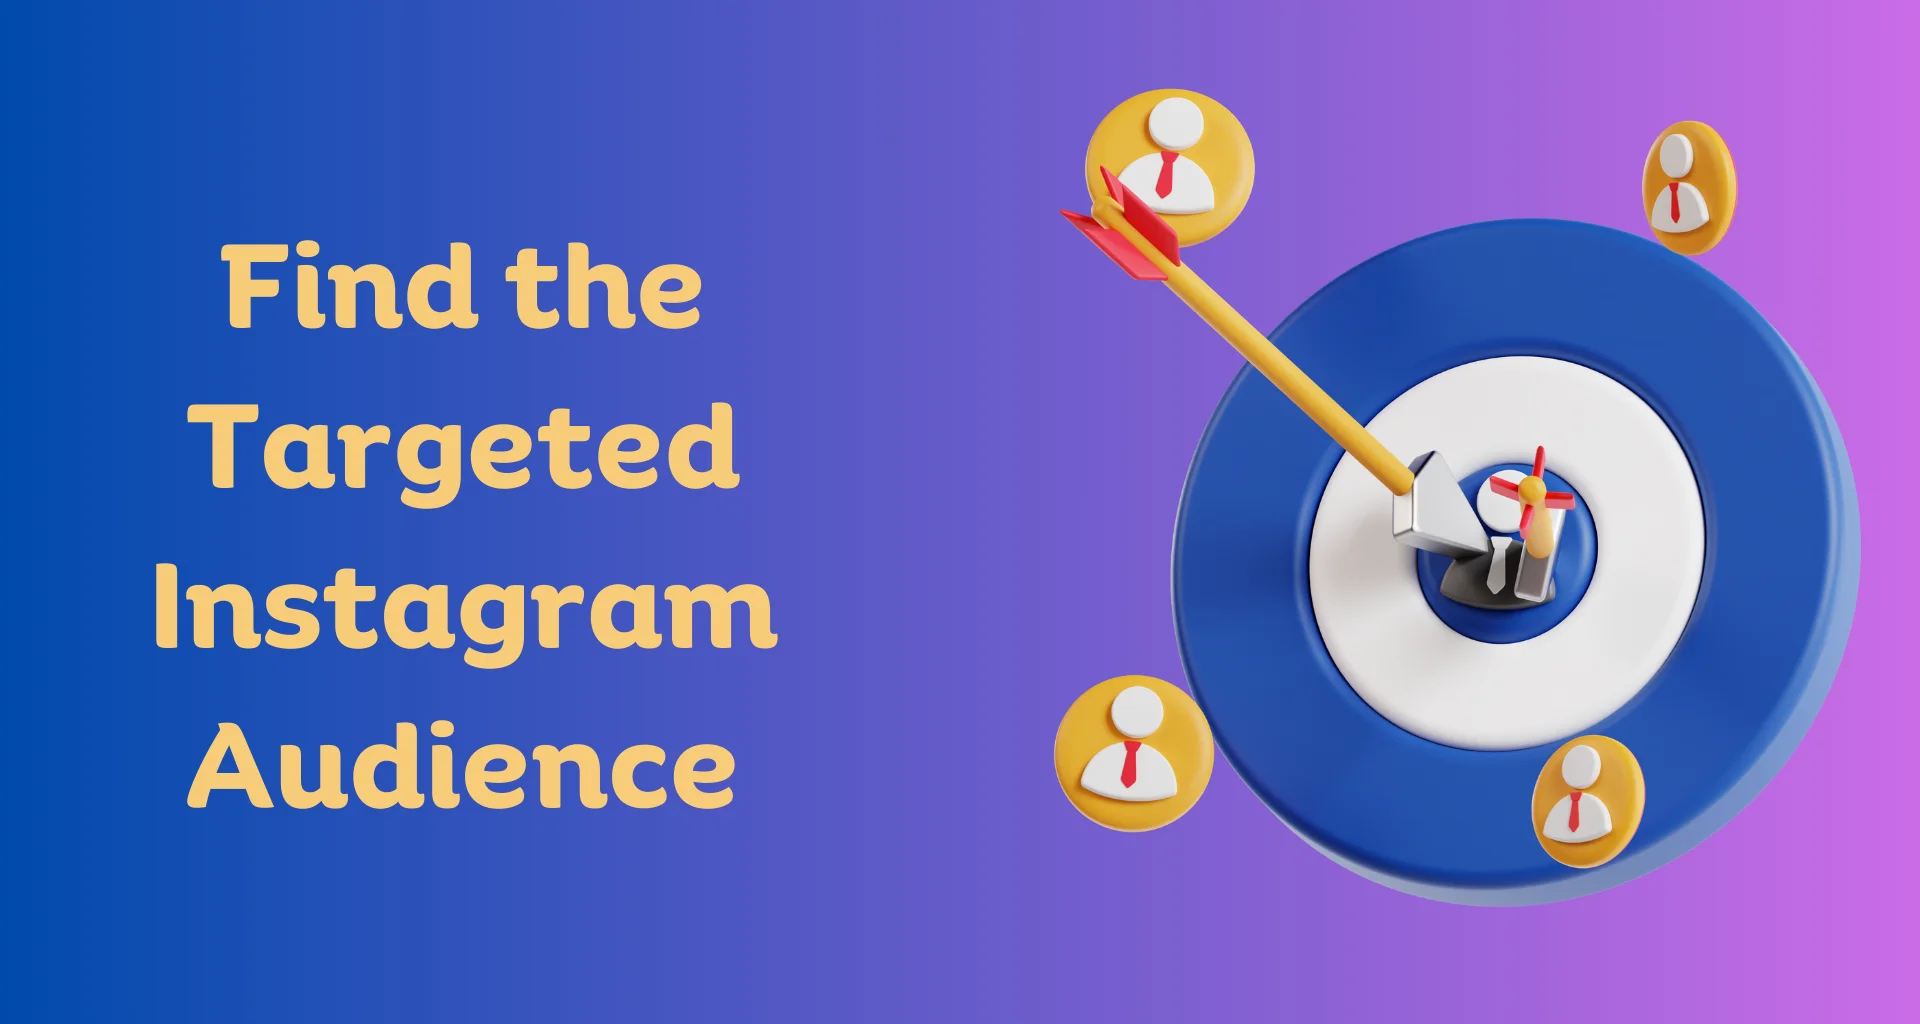 Find the Targeted Instagram Audience